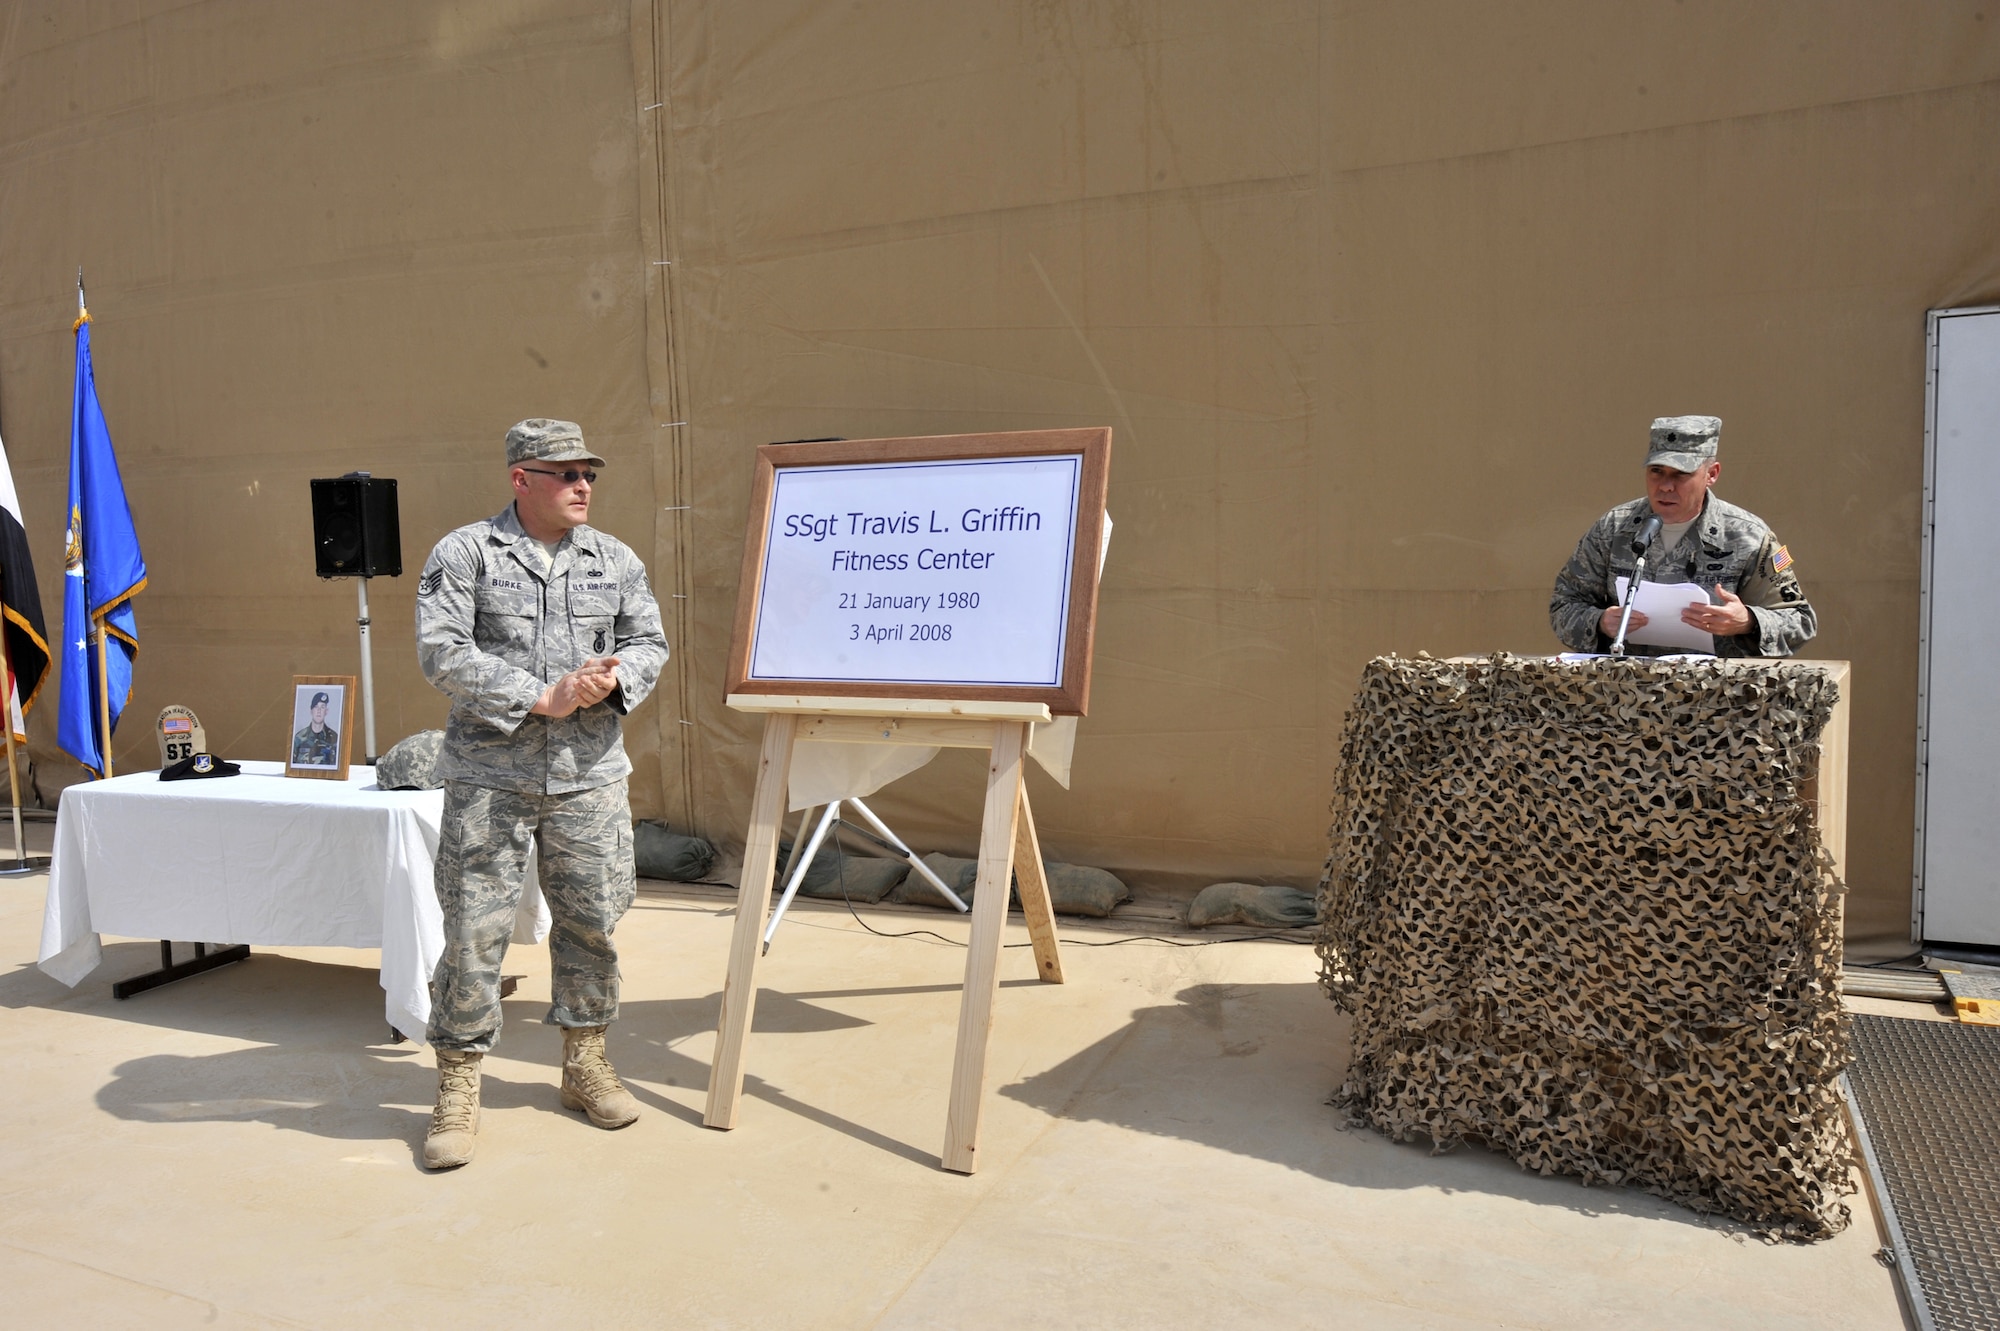 SATHER AIR BASE, Iraq – Staff Sgt. Ryan Burke, left, claps after unveiling a sign while Lt. Col. Steven Painter speaks to a crowd during a dedication ceremony here April 3 honoring a fallen security forces member. More than 75 447th Expeditionary Security Forces members and fellow Airmen attended the ceremony, during which Sather Airmen renamed the base fitness center after Staff Sergeant Travis Griffin, who lost his life April 3, 2008, while on patrol in Baghdad, Iraq. Colonel Painter is the 447th Expeditionary Security Forces commander here. Sergeant Burke was Sergeant Griffin’s friend and attended the ceremony from Balad Air Base, Iraq, where he is deployed as a 532nd ESFS member. (U.S. Air Force photo by Staff Sgt. Amanda Currier)